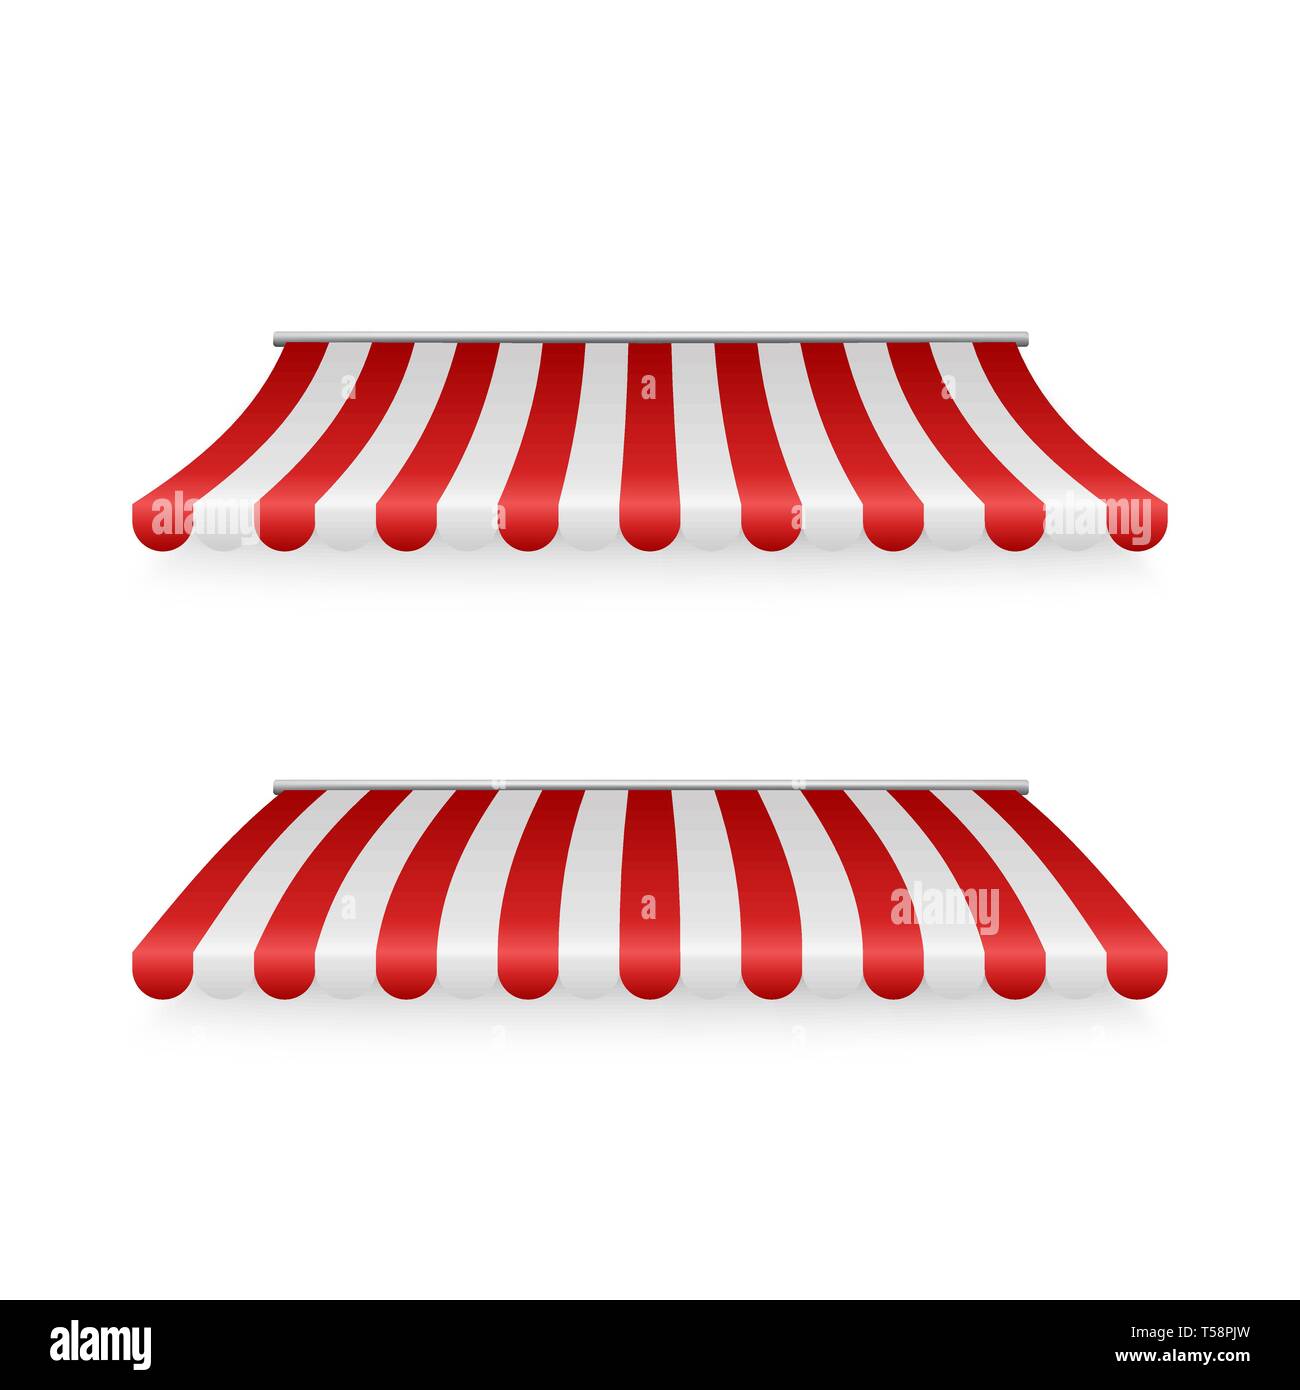 Marketplace striped roof. Awnings shadows front view. Vector illustration Stock Vector